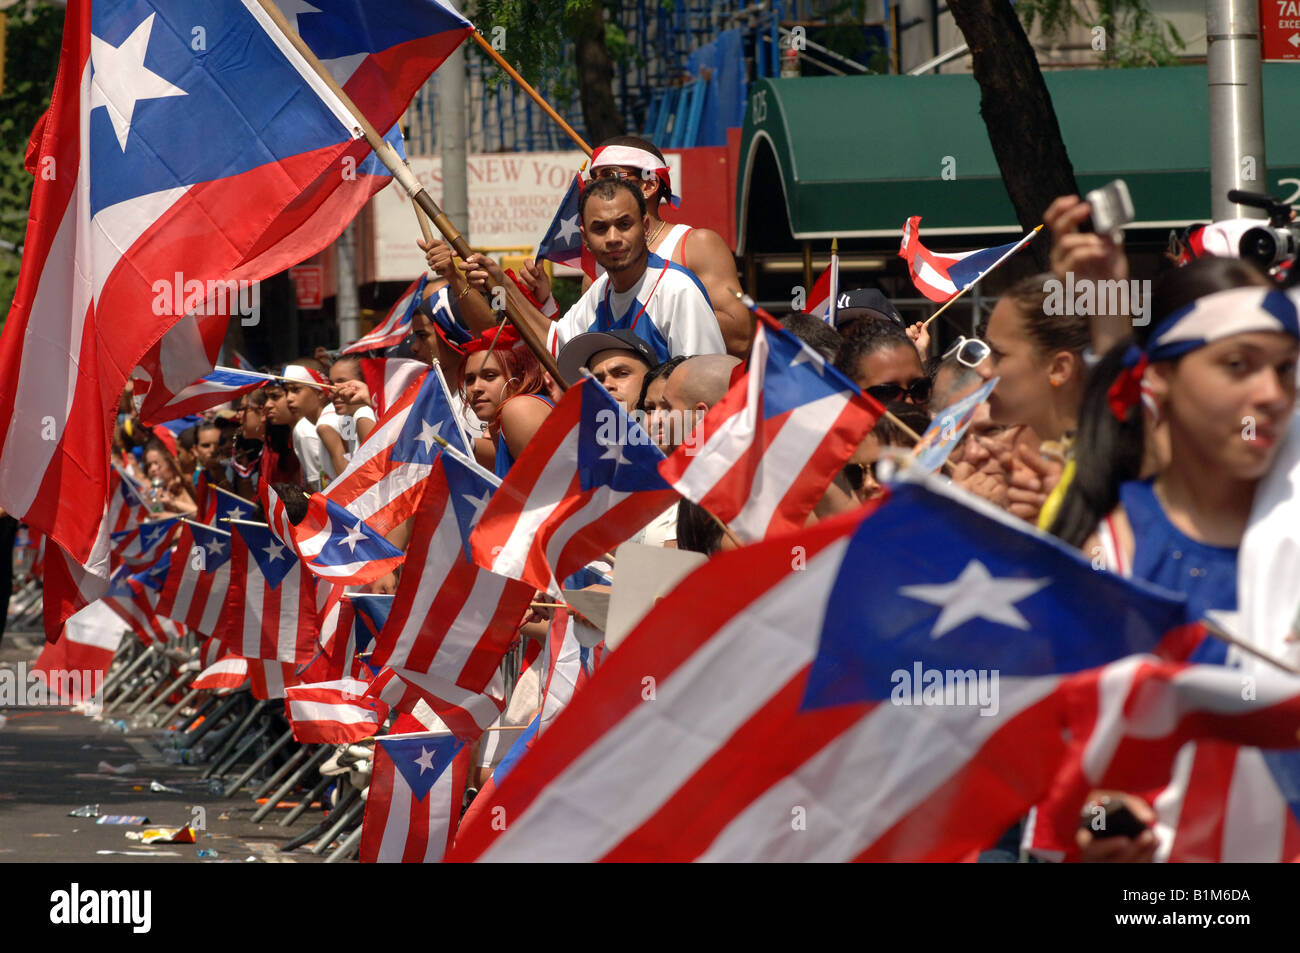 Spectators watch the 13th Annual National Puerto Rican Day Parade in New York on Fifth Avenue Stock Photo